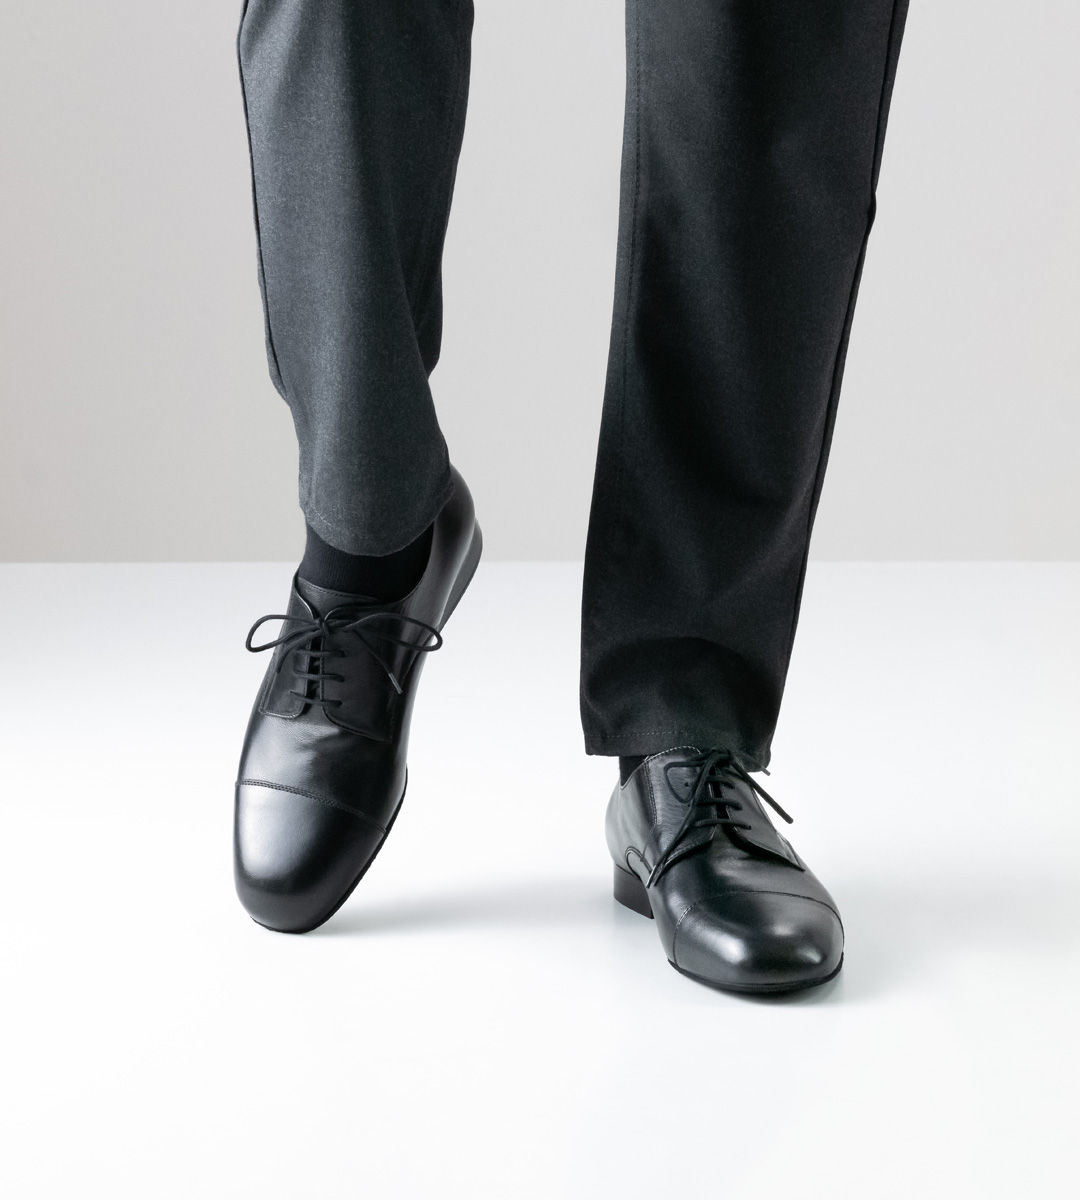 Men's dance shoe for wide feet by Werner Kern in combination with grey trousers